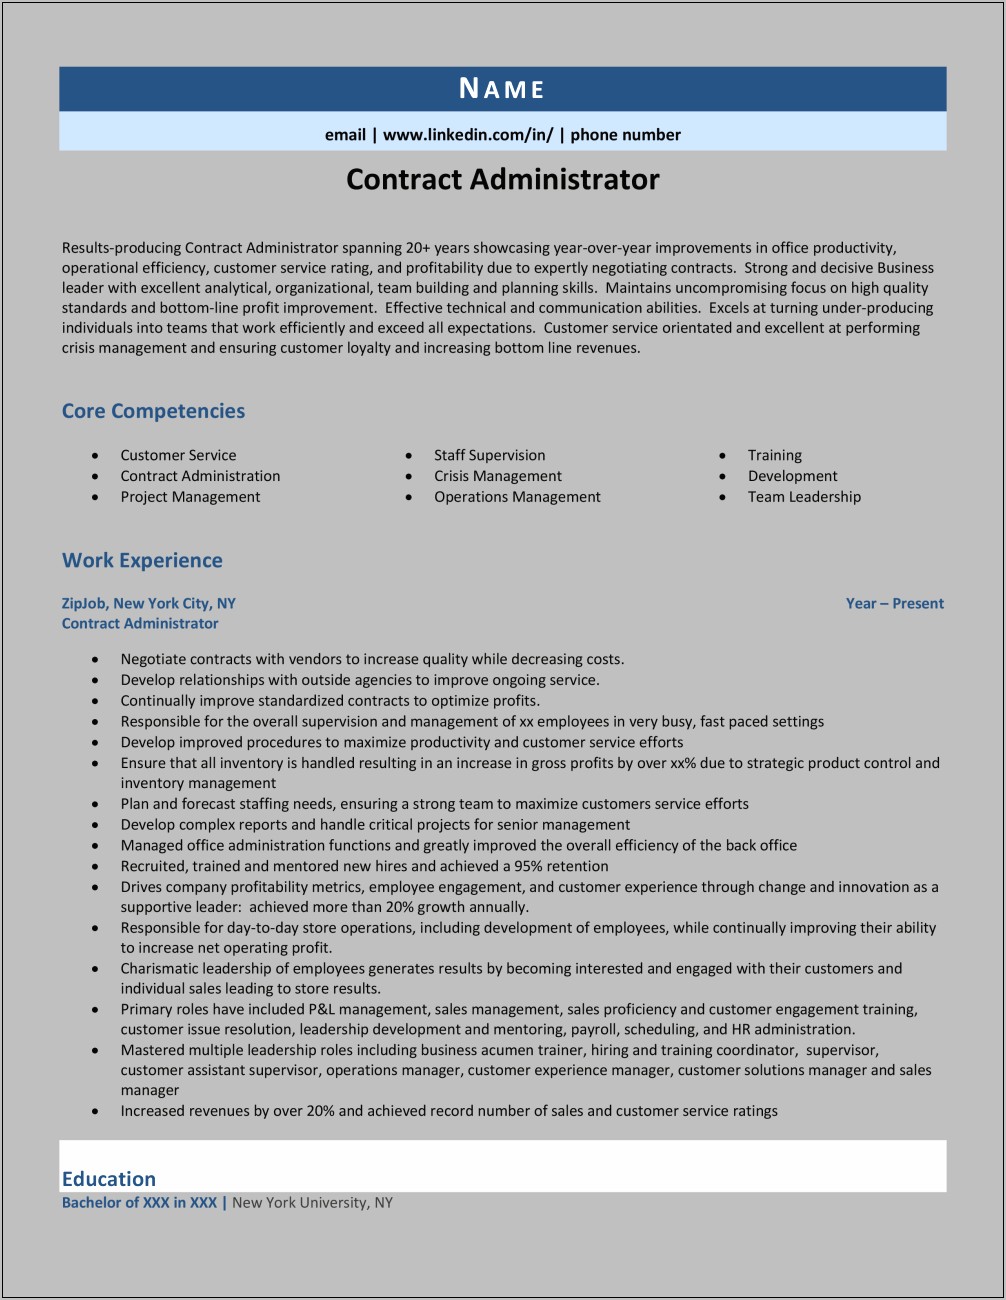 Professional Contract Administrator Resume Objective